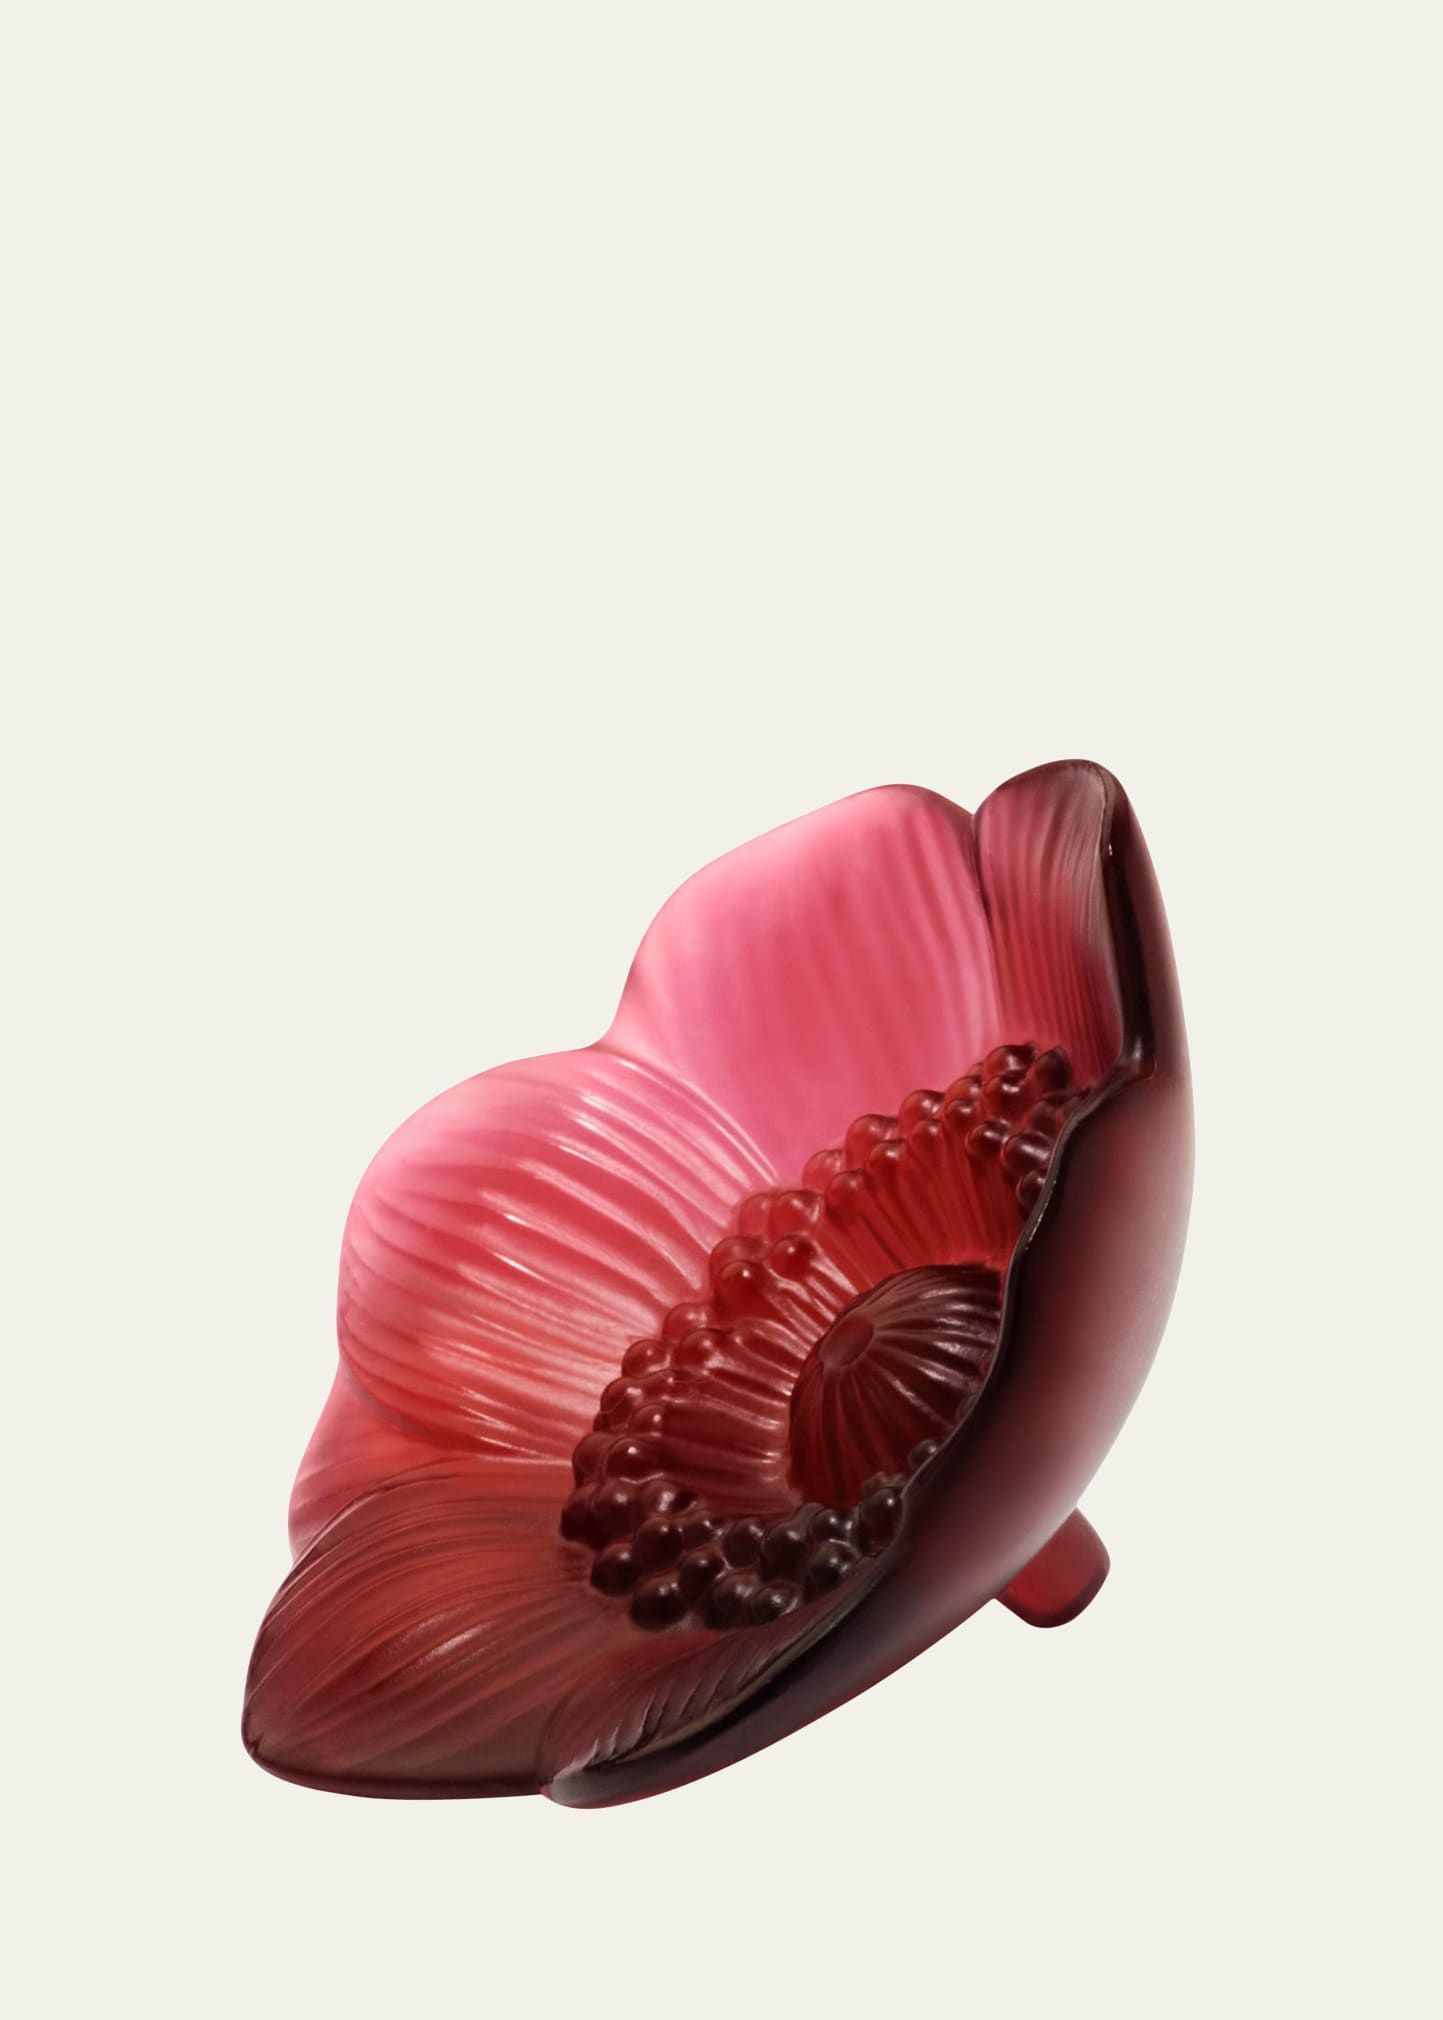 Lalique Anemone Figure, Red